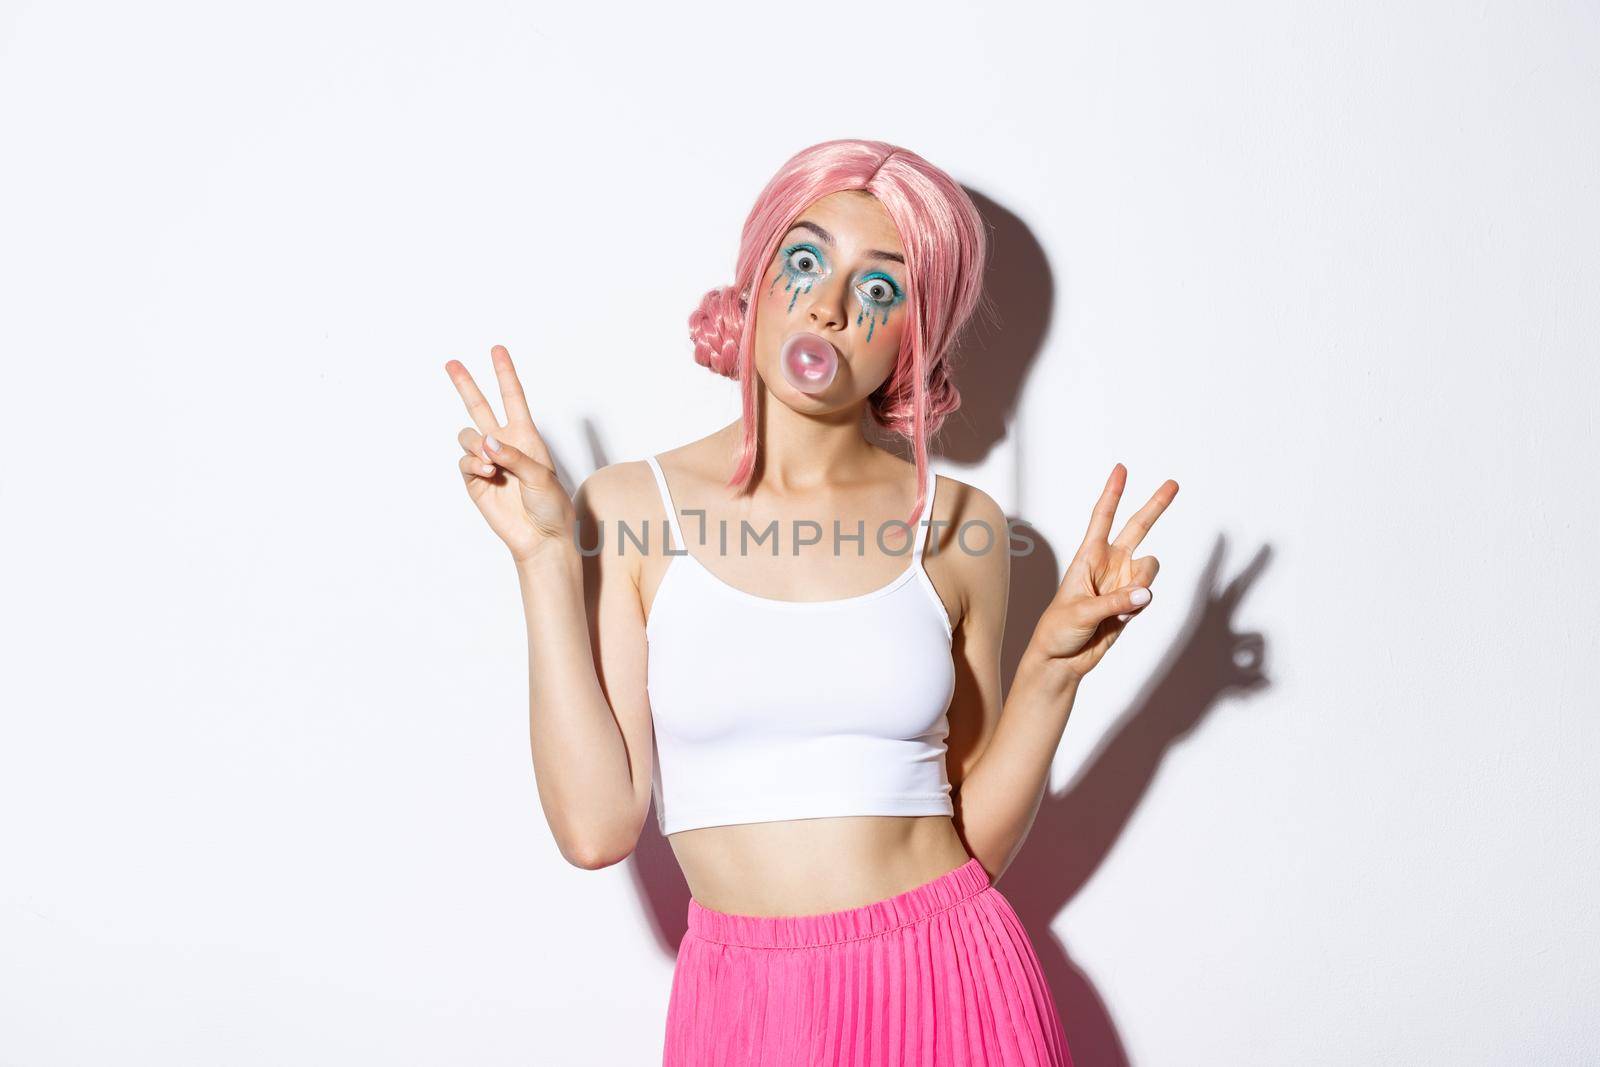 Image of beautiful girl in pink wig blowing chewing gum, popping bubble on face and showing peace signs, standing silly over white background.